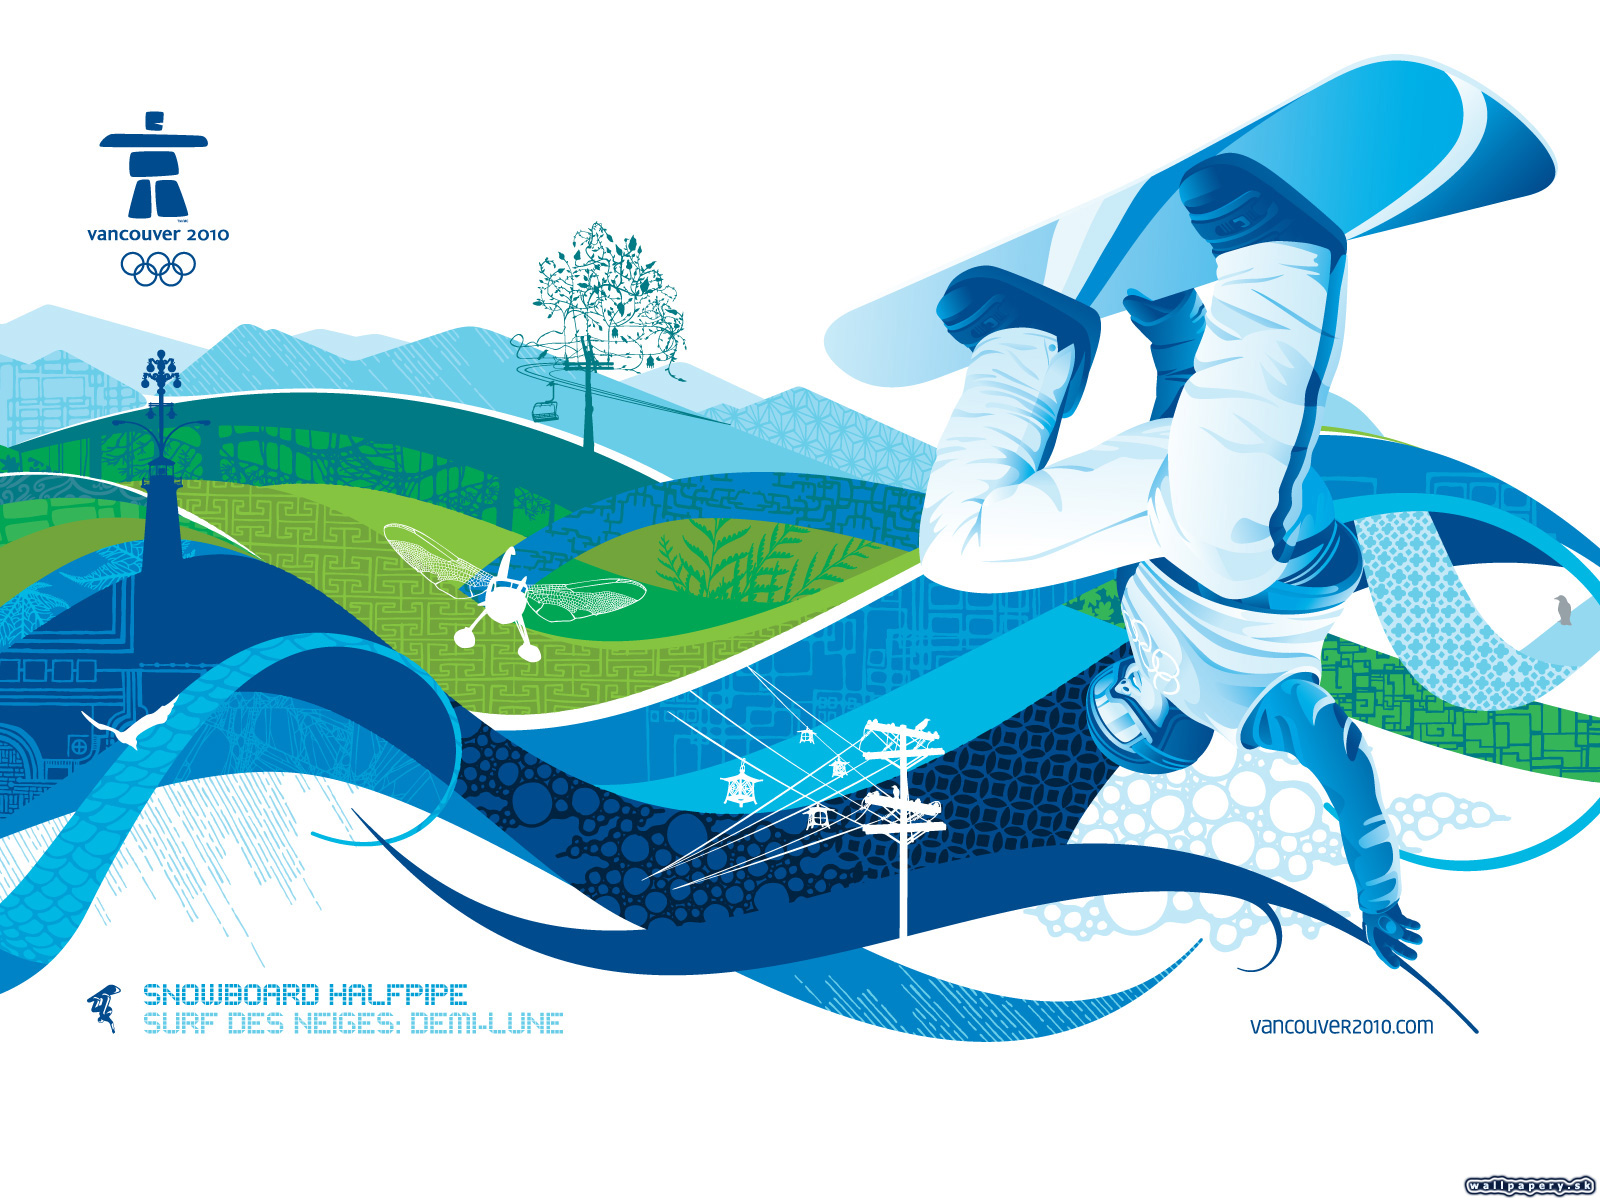 Vancouver 2010 - The Official Video Game of the Olympic Winter Games - wallpaper 8